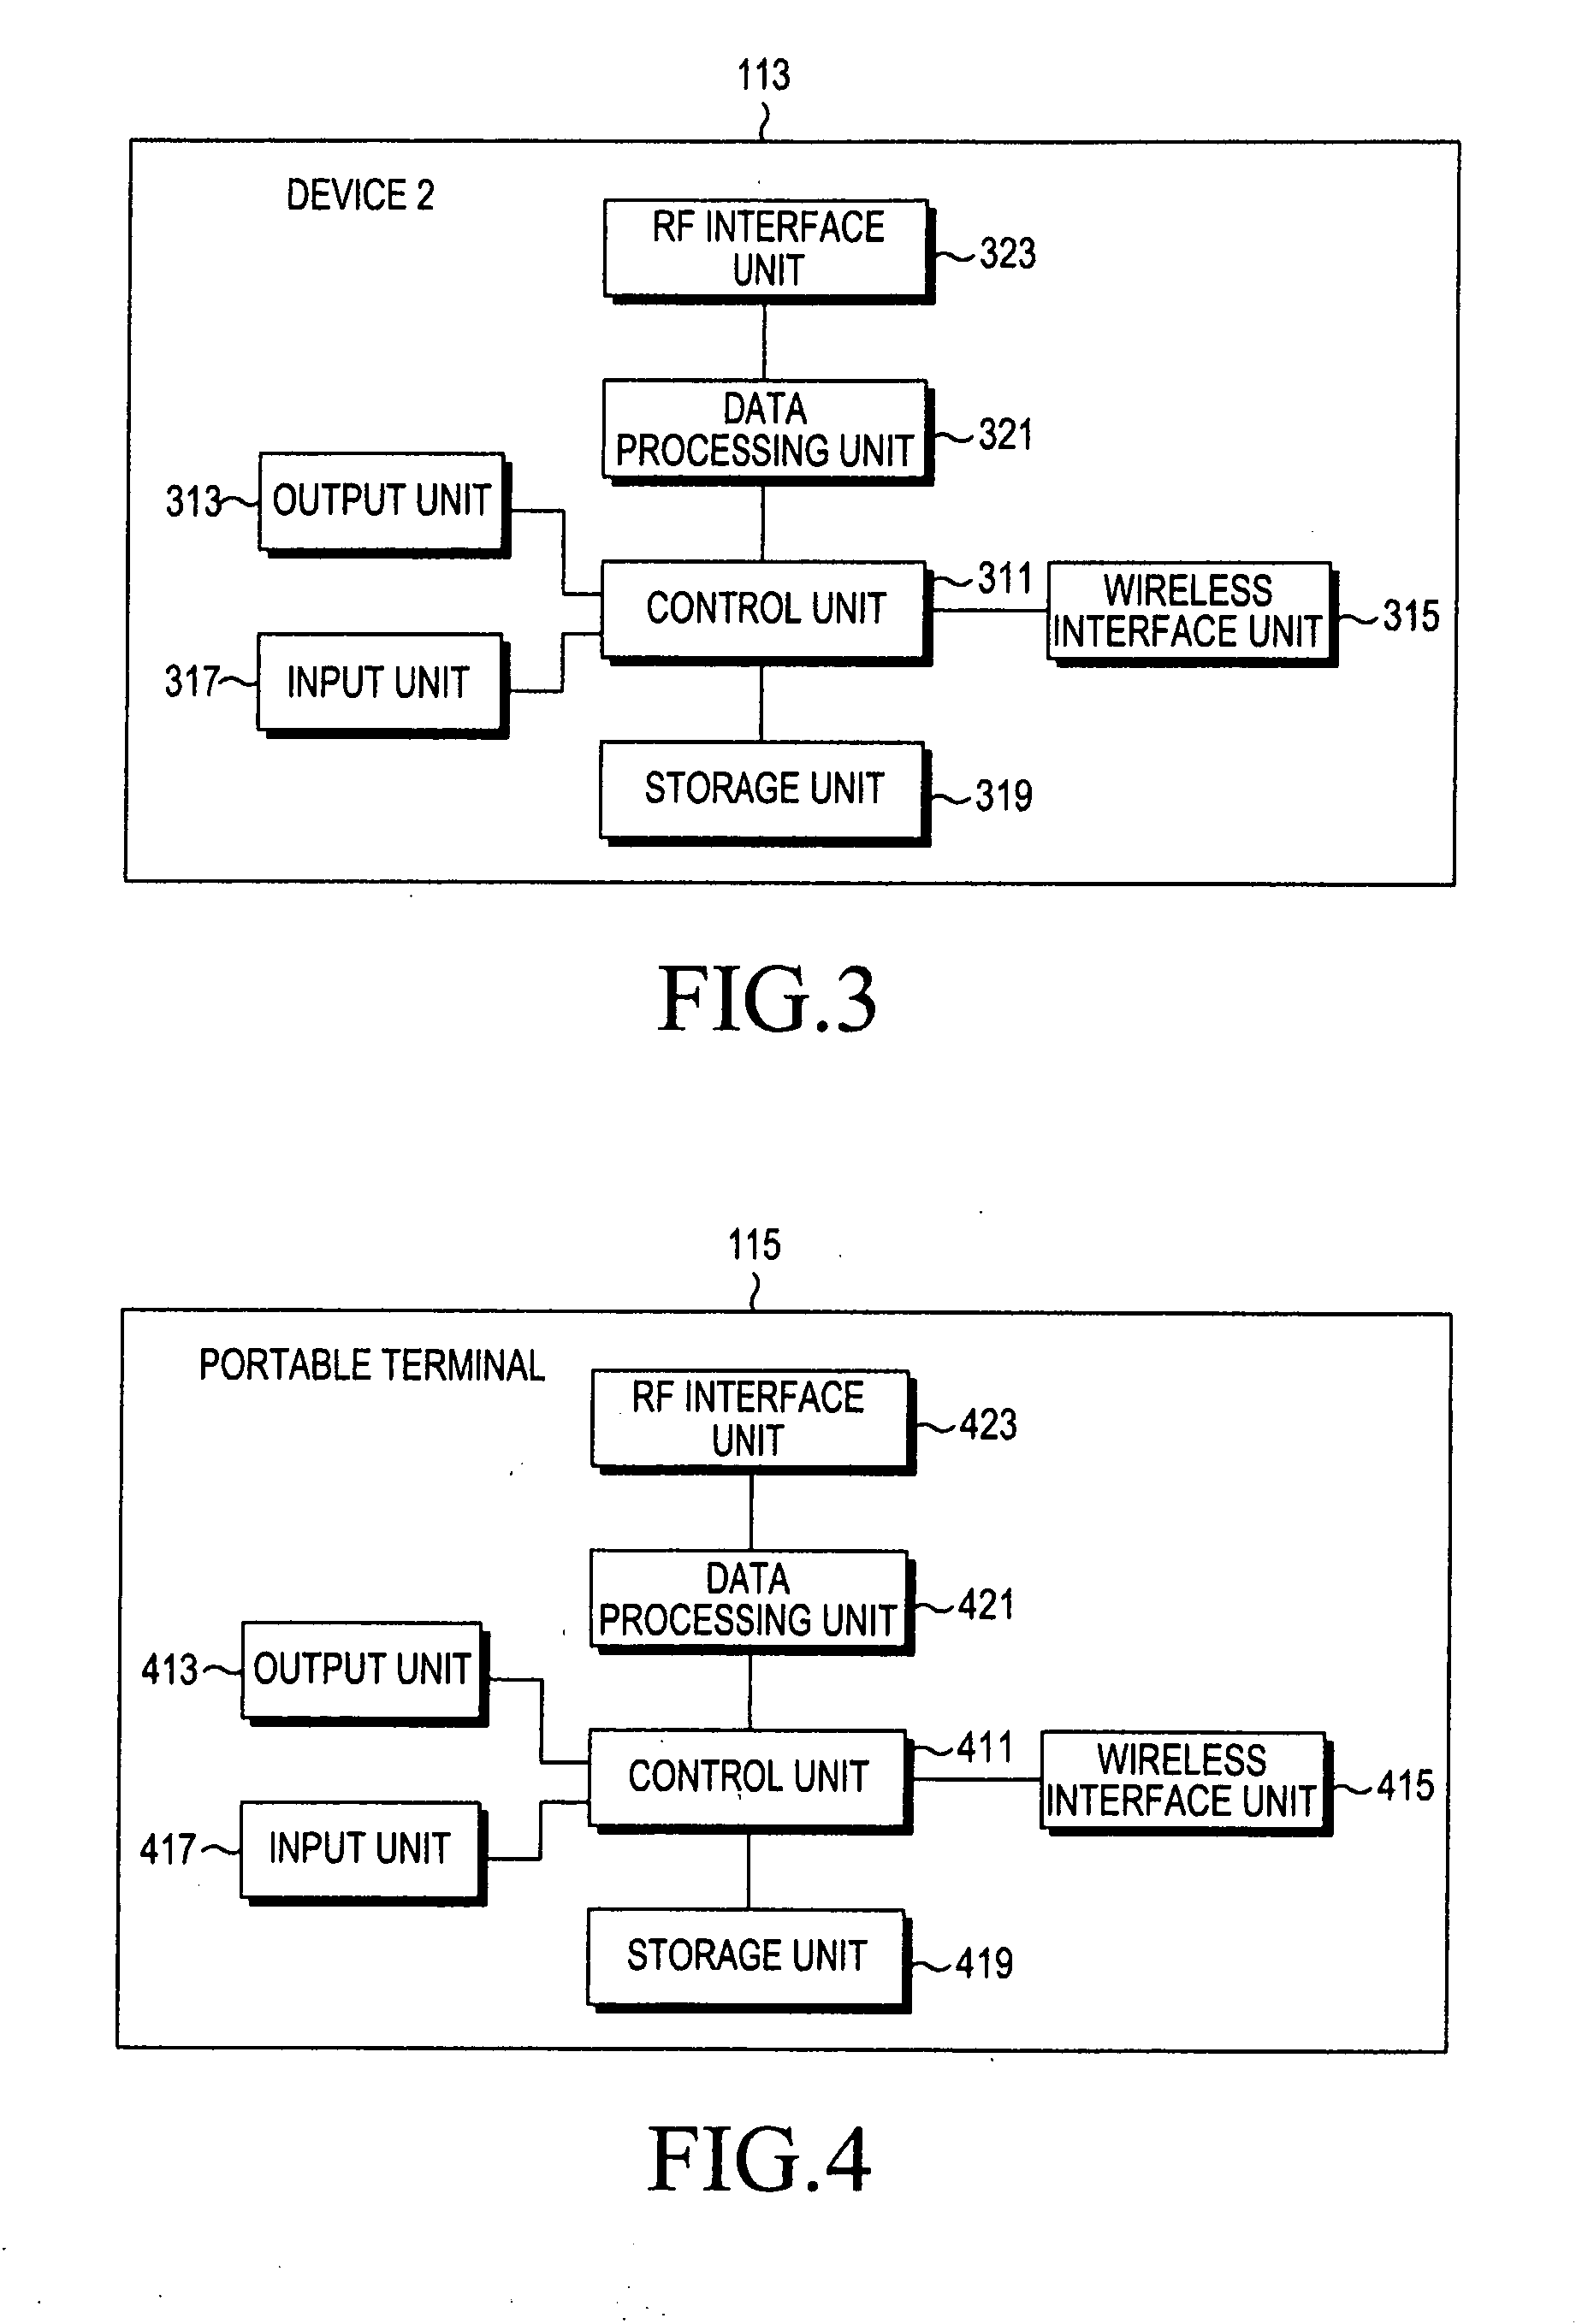 Apparatus and method for controlling devices using portable terminal in device automation system